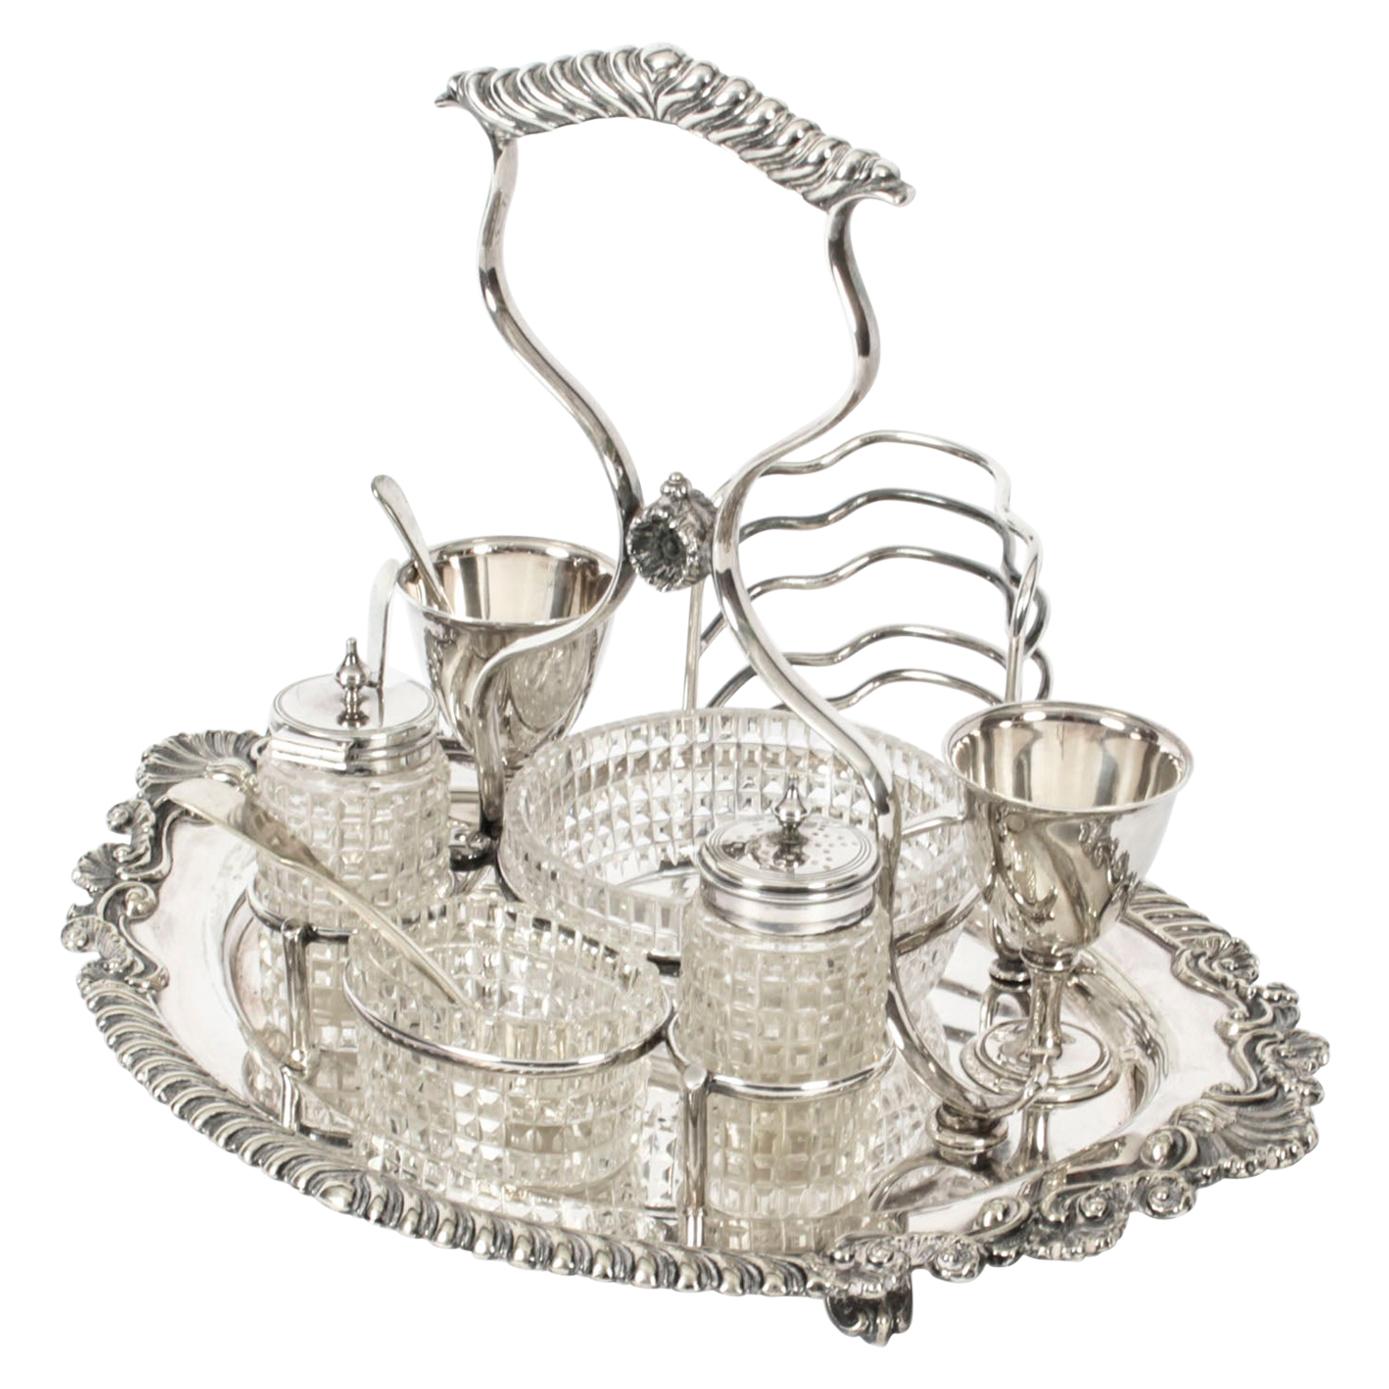 Antique Victorian Silver Plated Breakfast Set Toast Rack, 19th Century